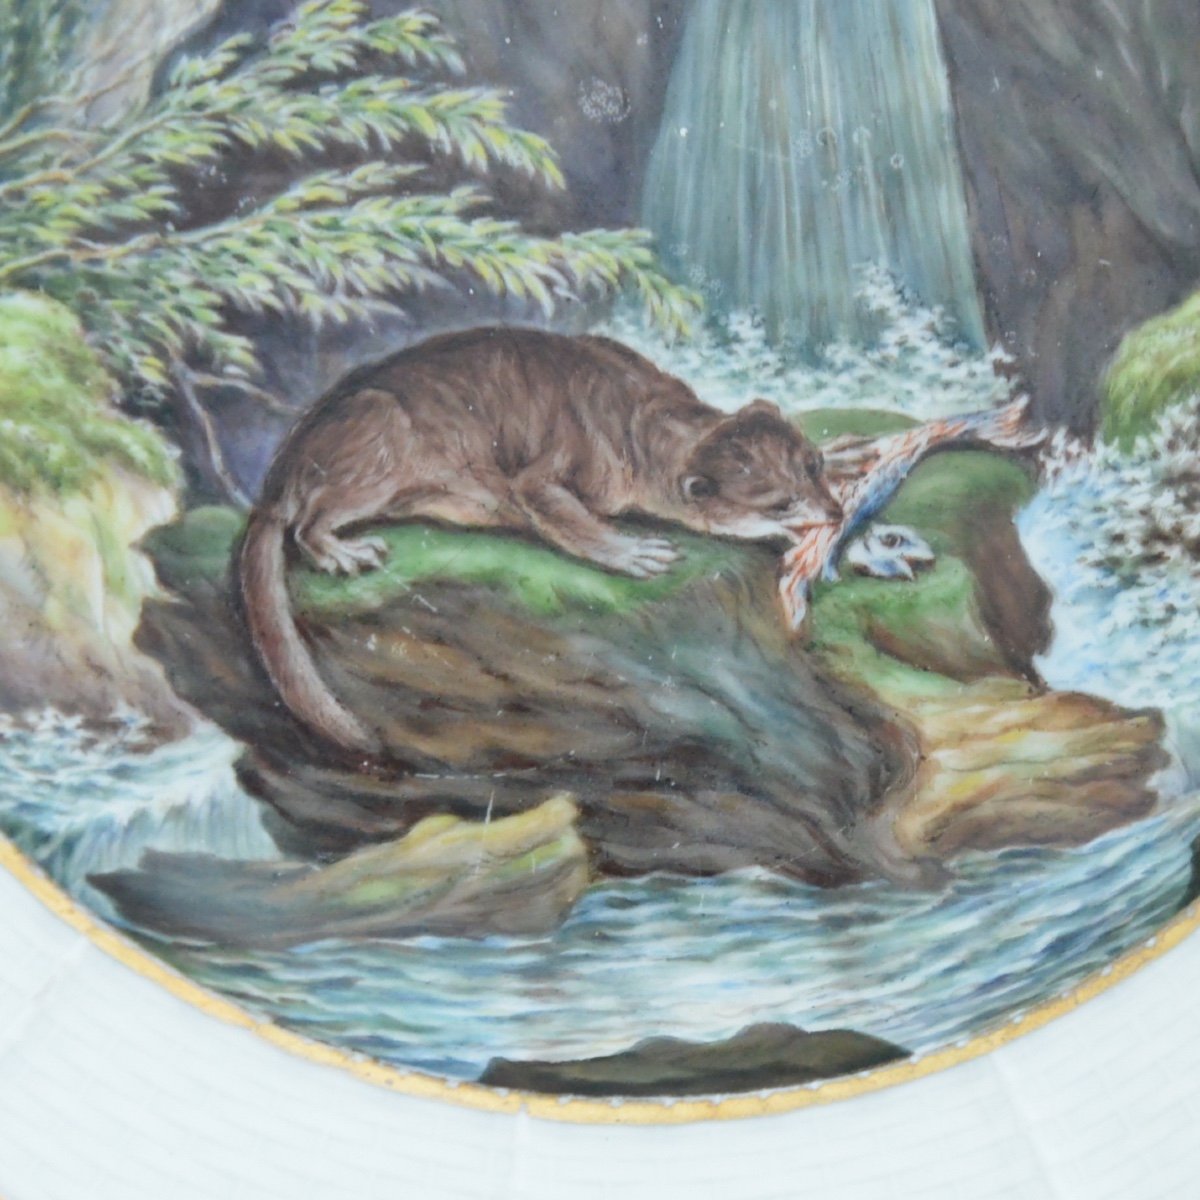 Kpm Berlin Porcelain Plate Decor In The Center Of A XIXth Fishing Otter-photo-2